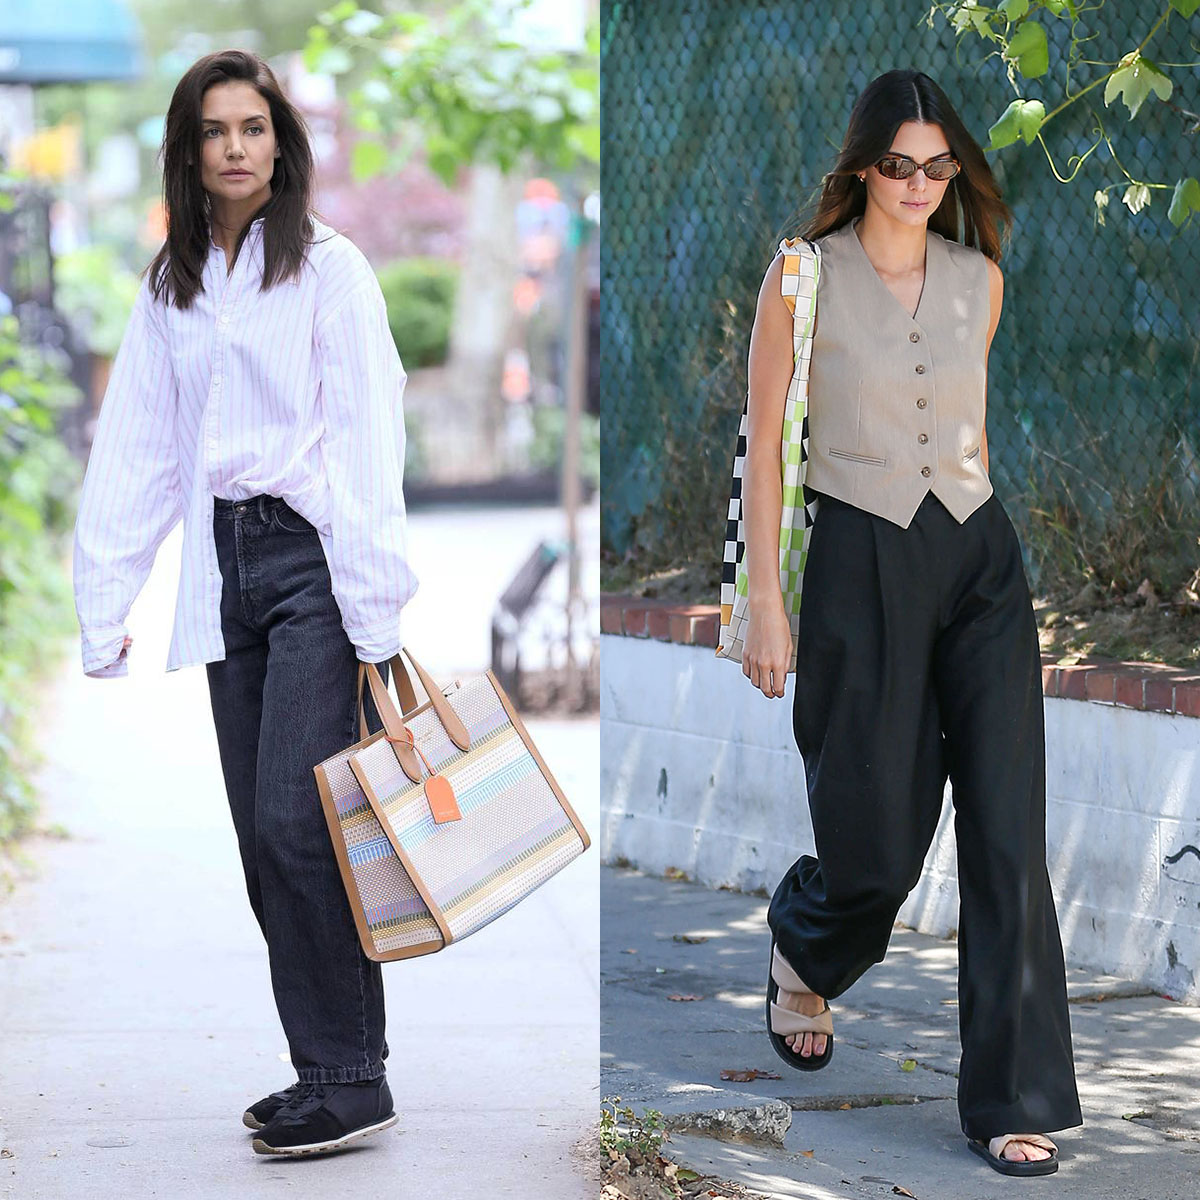 The Comfy Flat Shoes Kendall Jenner and Katie Holmes Wear